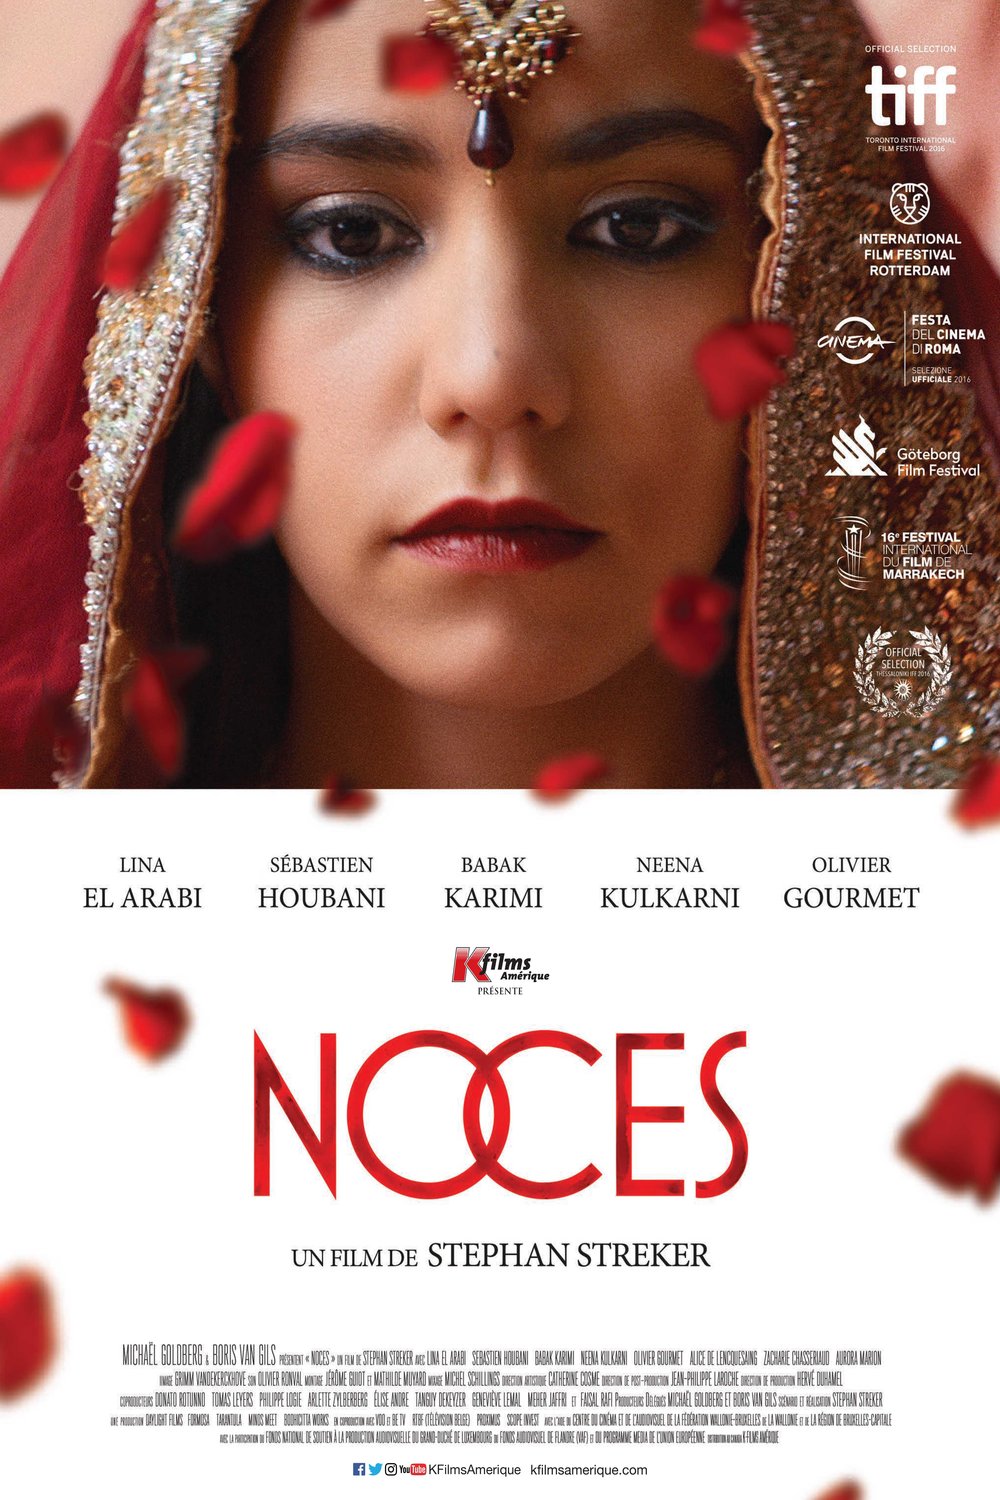 Poster of the movie Noces